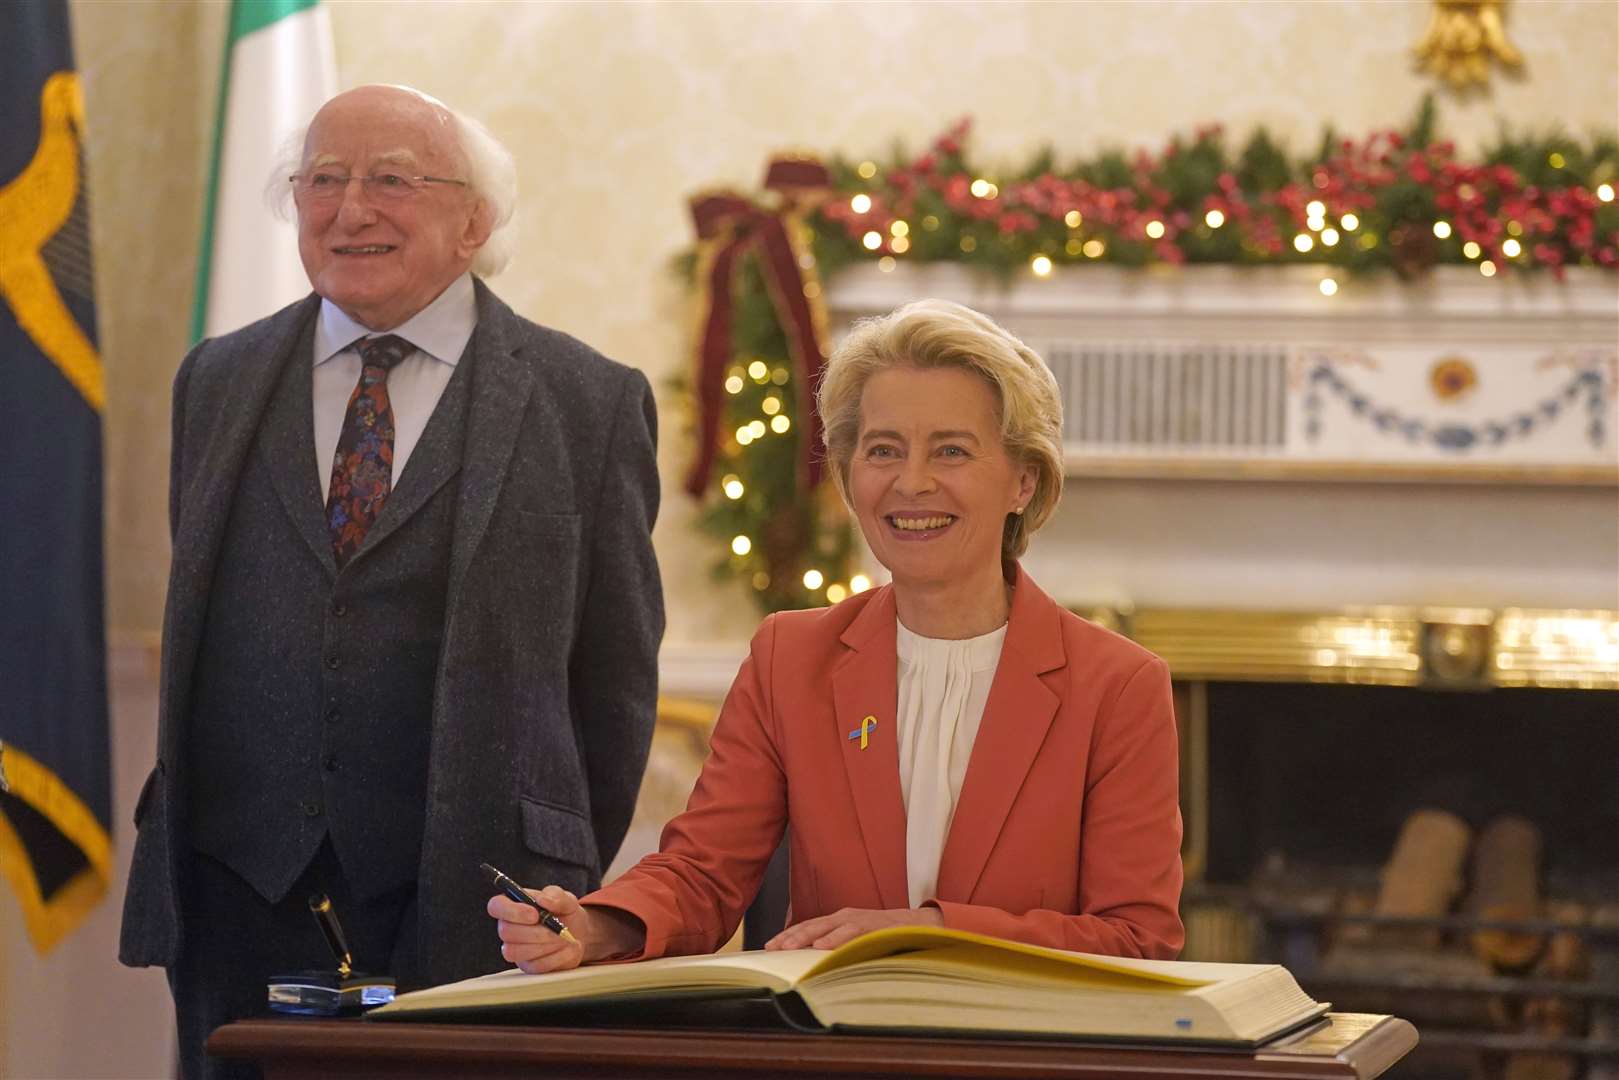 European Commission President Ursula von der Leyen signs the distinguished guests book as she meets President Michael D Higgins at Houses of Oireachtas in Dublin in 2022 (PA)